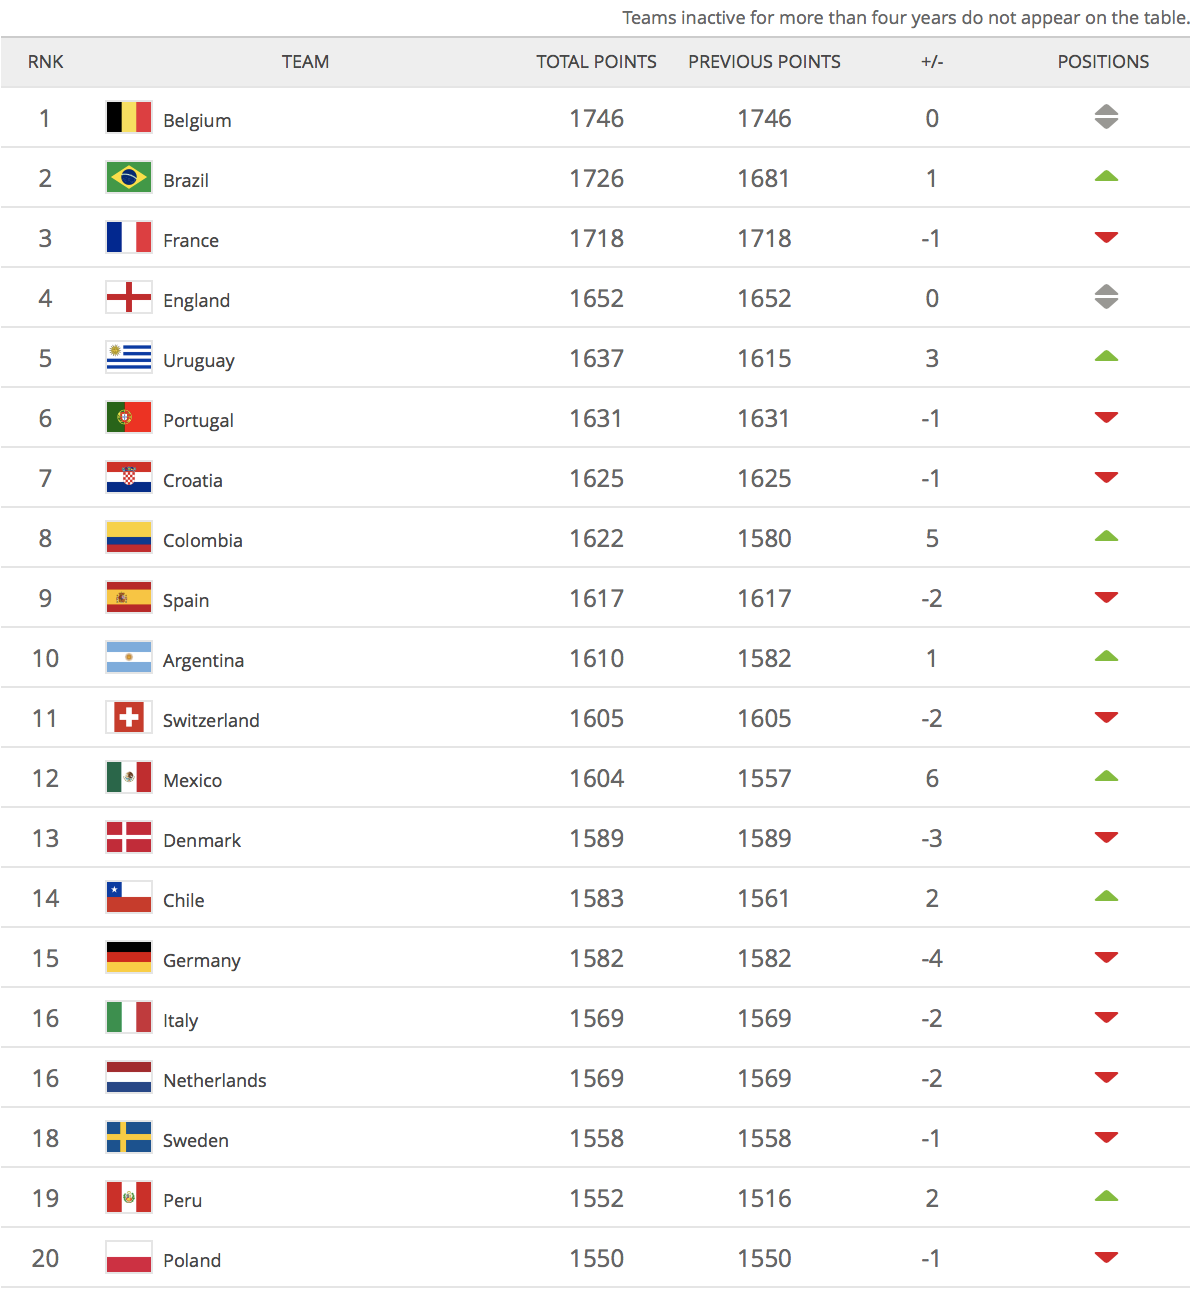 confederation-tourneys-bring-change-to-fifa-rankings-with-algeria